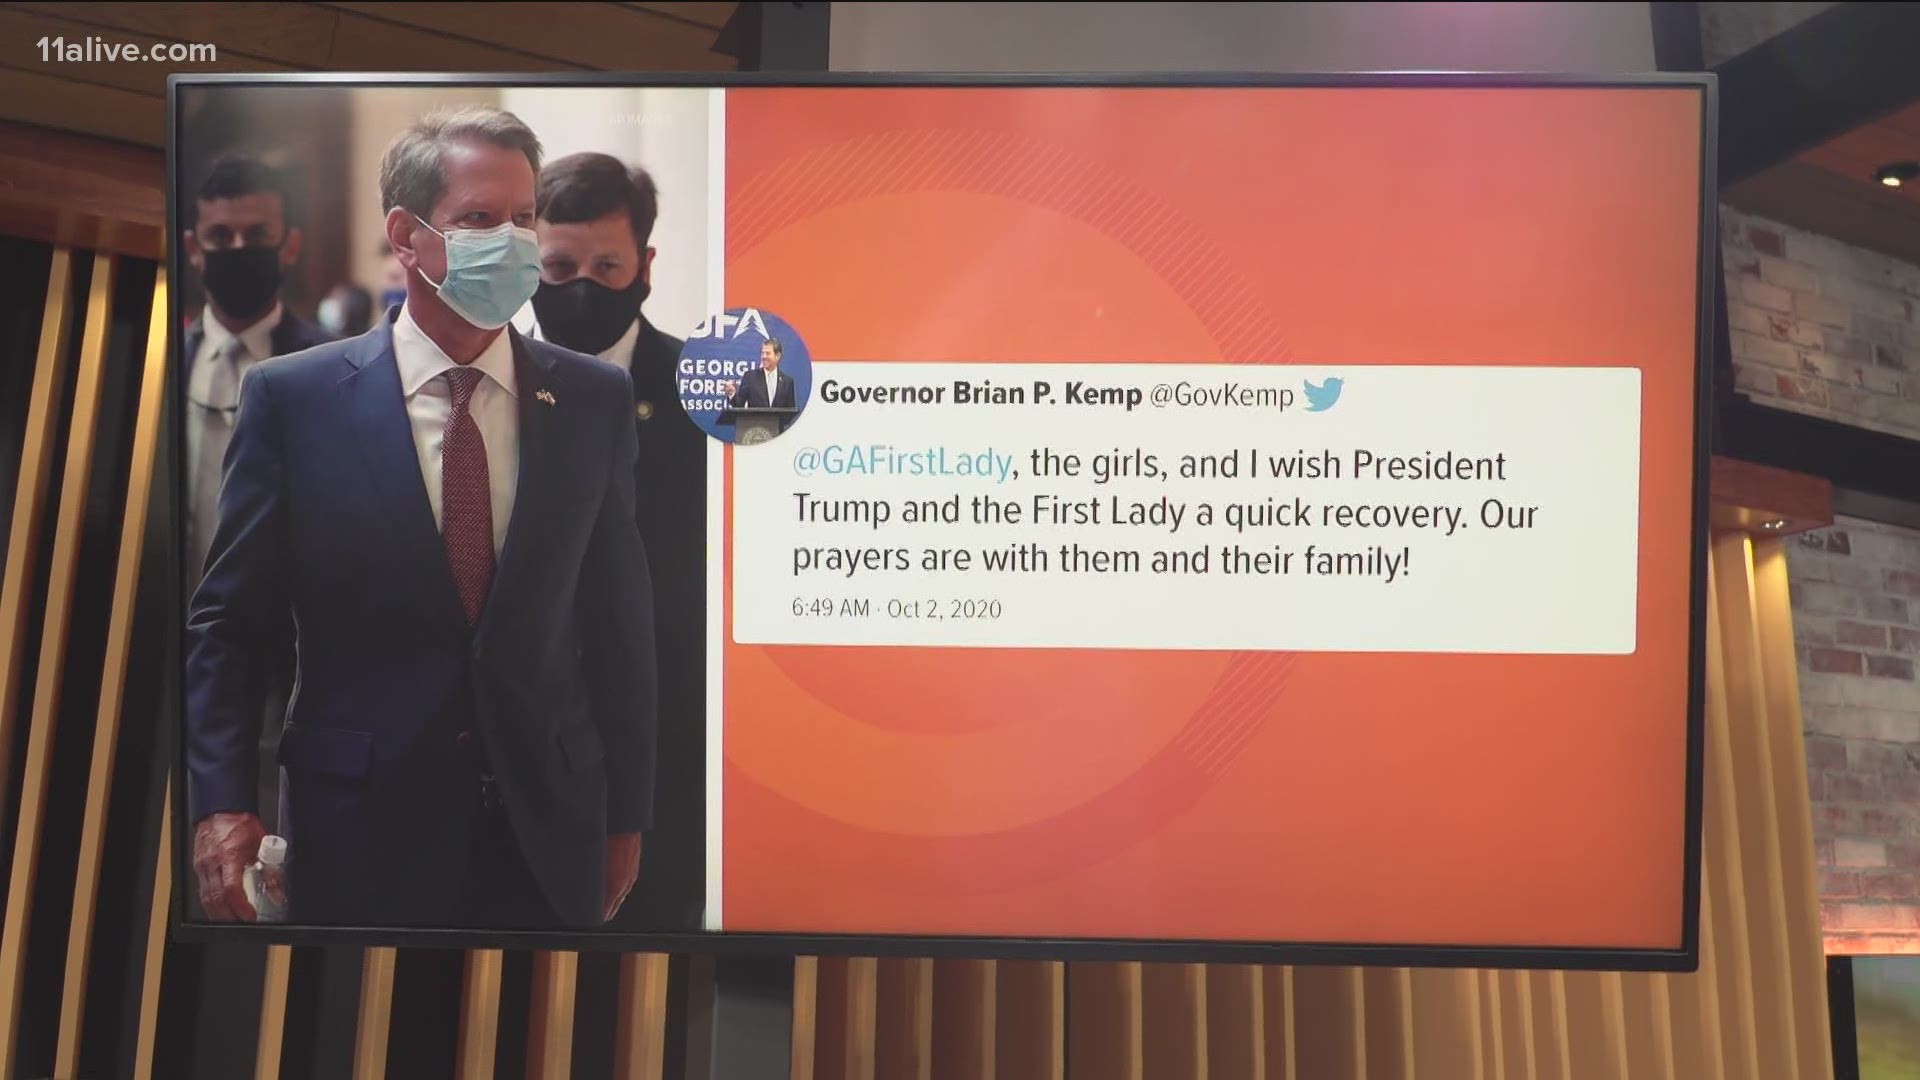 Gov. Brian Kemp and Atlanta Mayor Keisha Lance Bottoms were among those to offer messages after the news.